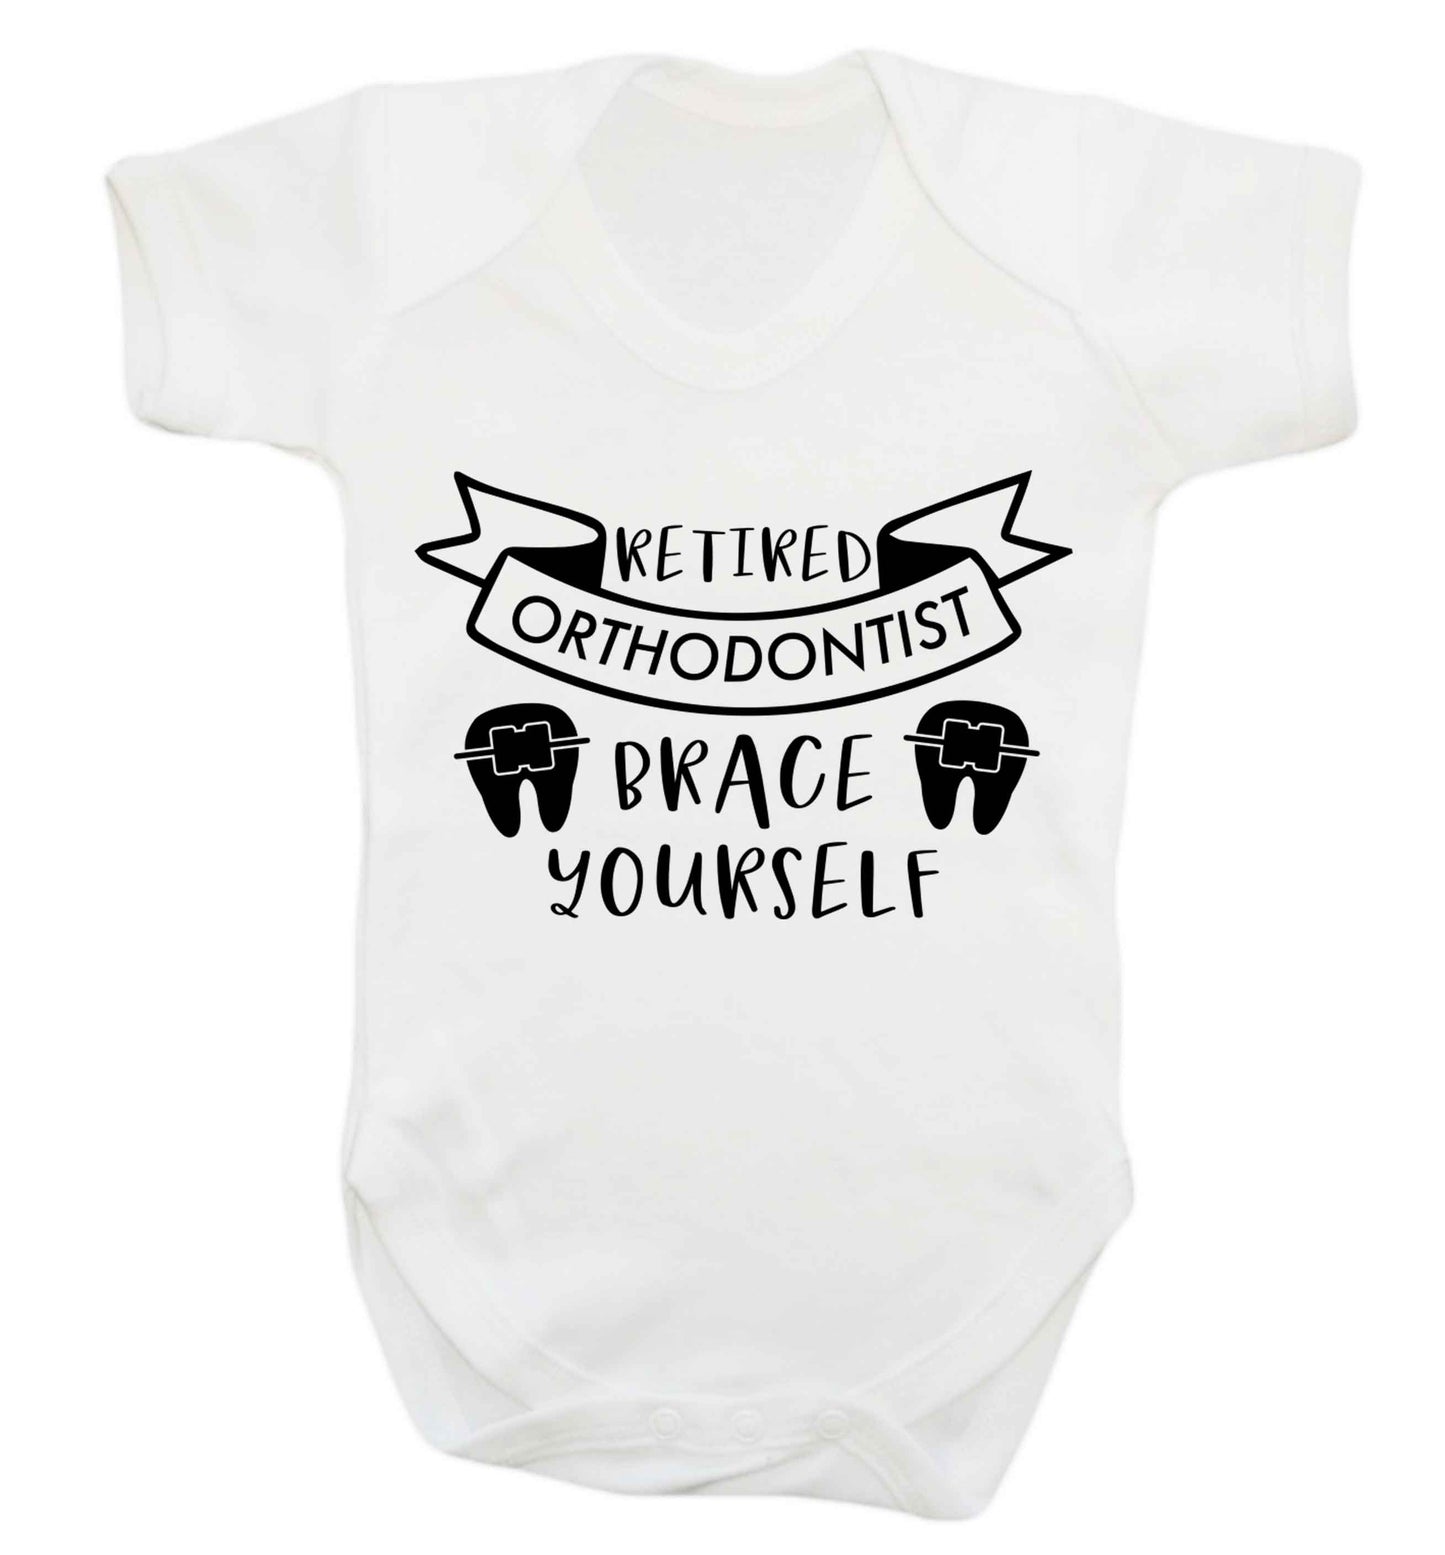 Retired orthodontist brace yourself Baby Vest white 18-24 months